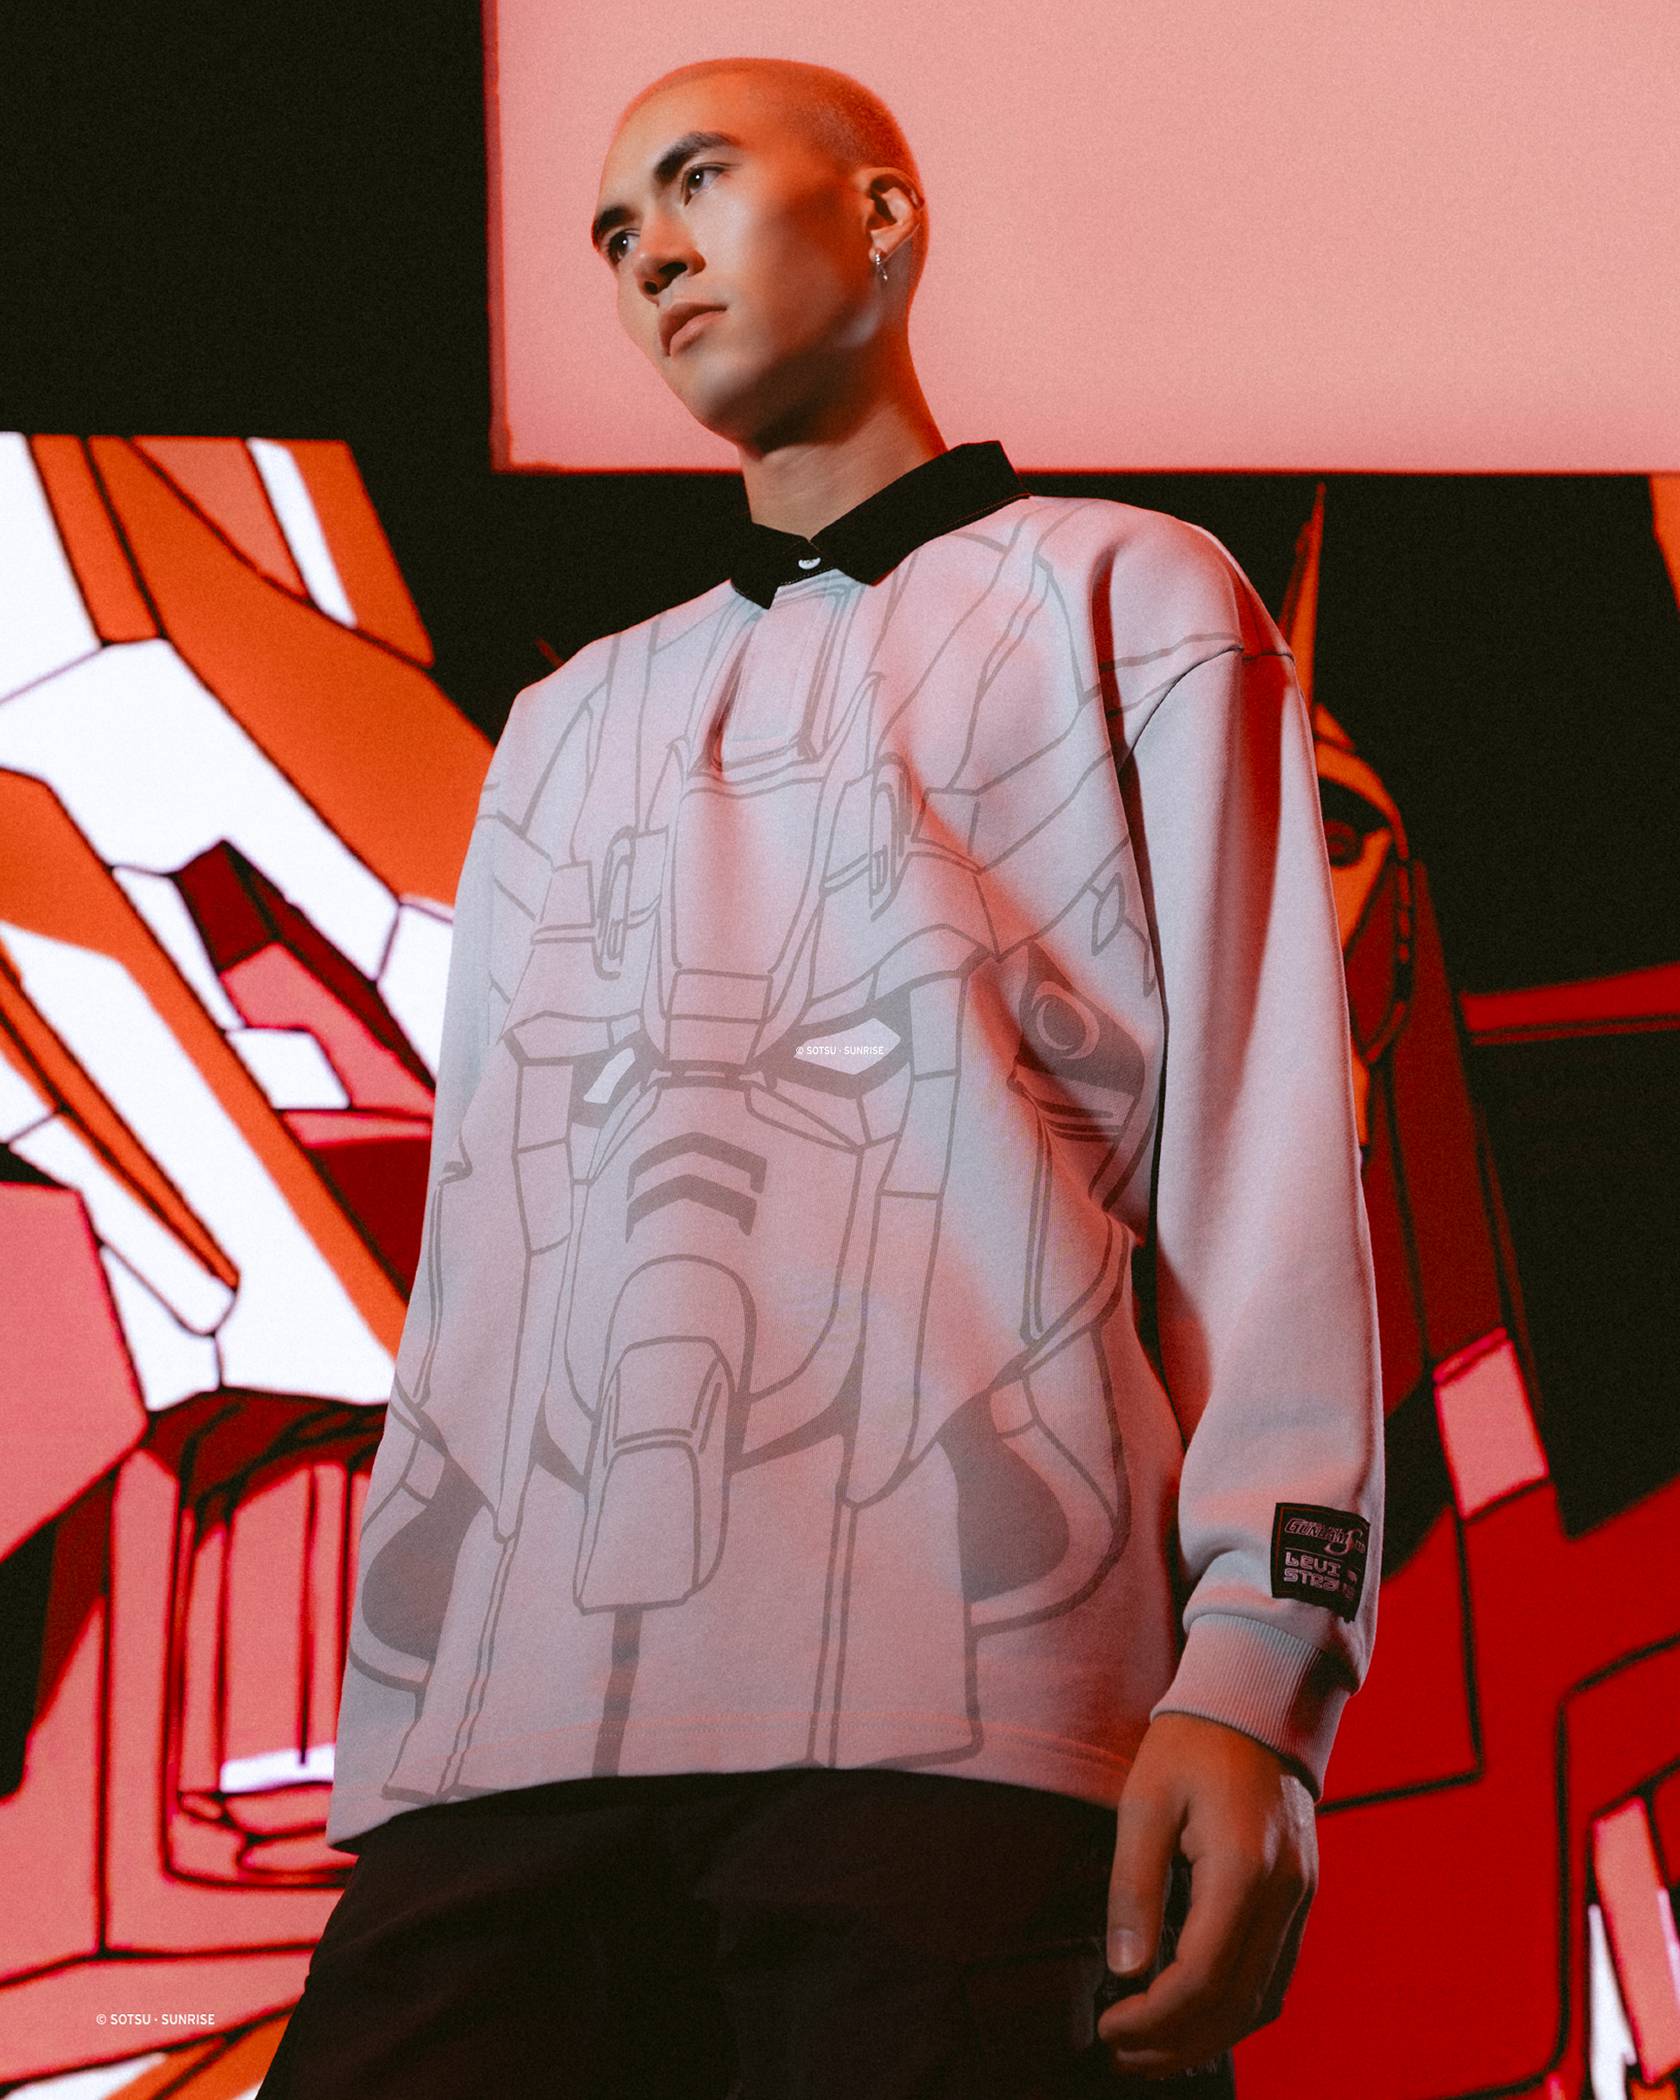 Image of male model wearing futuristic clothing against Sci-fi background